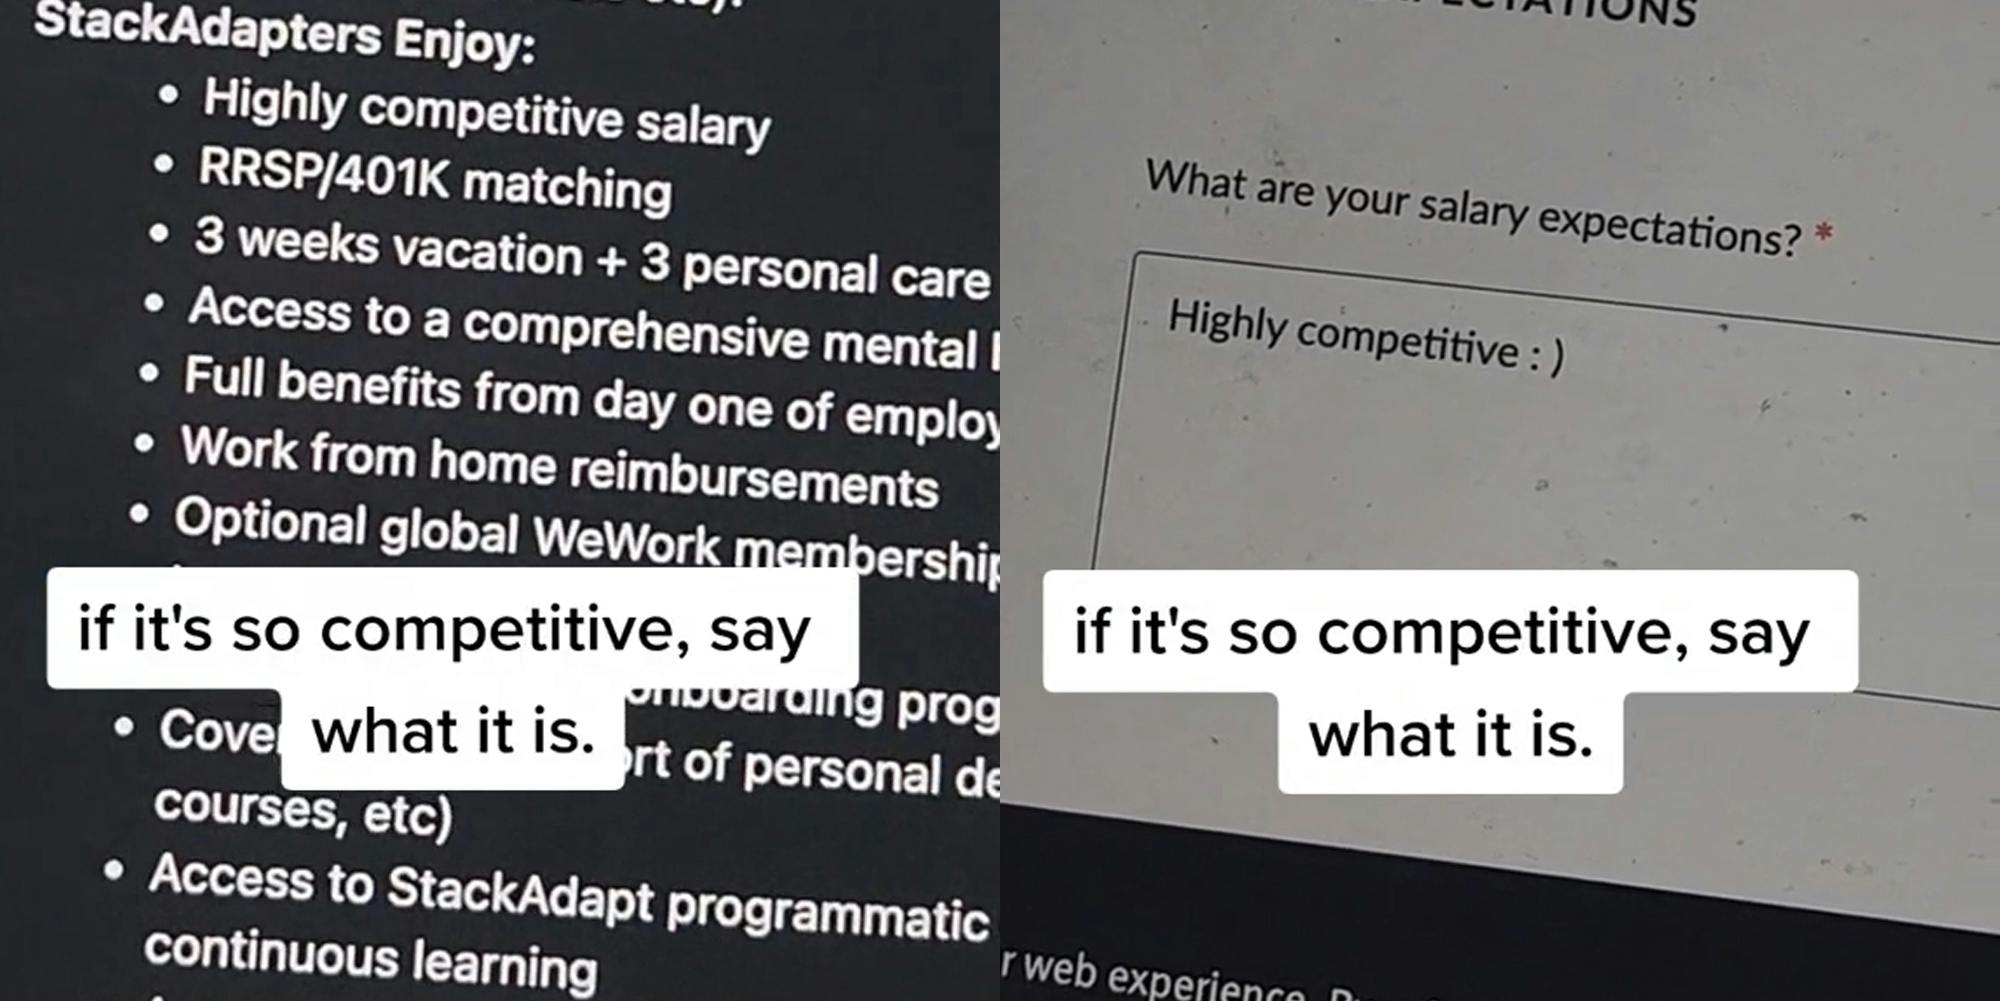 job listing with caption "if it's so competitive, say what it is." (l) job listing with text box "What are your salary expectations? Highly competitive ;)" with caption "if it's so competitive, say what it is." (r)